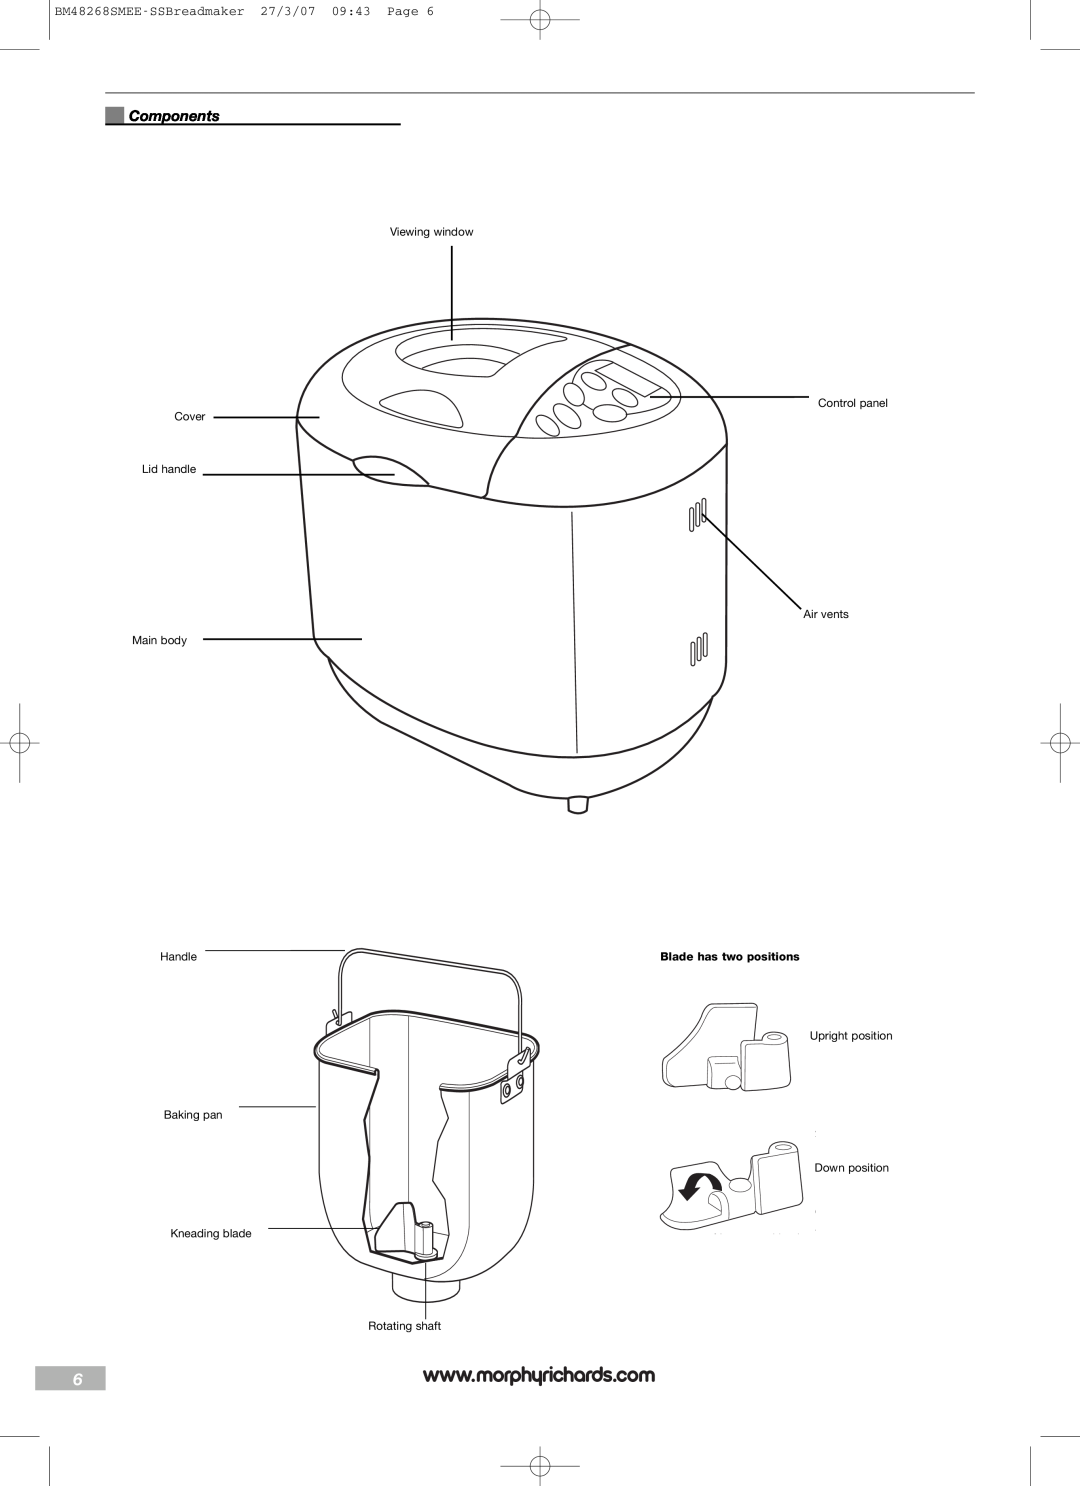 Morphy Richards manual Components, BM48268SMEE-SSBreadmaker27/3/07 09:43 Page, Blade has two positions 